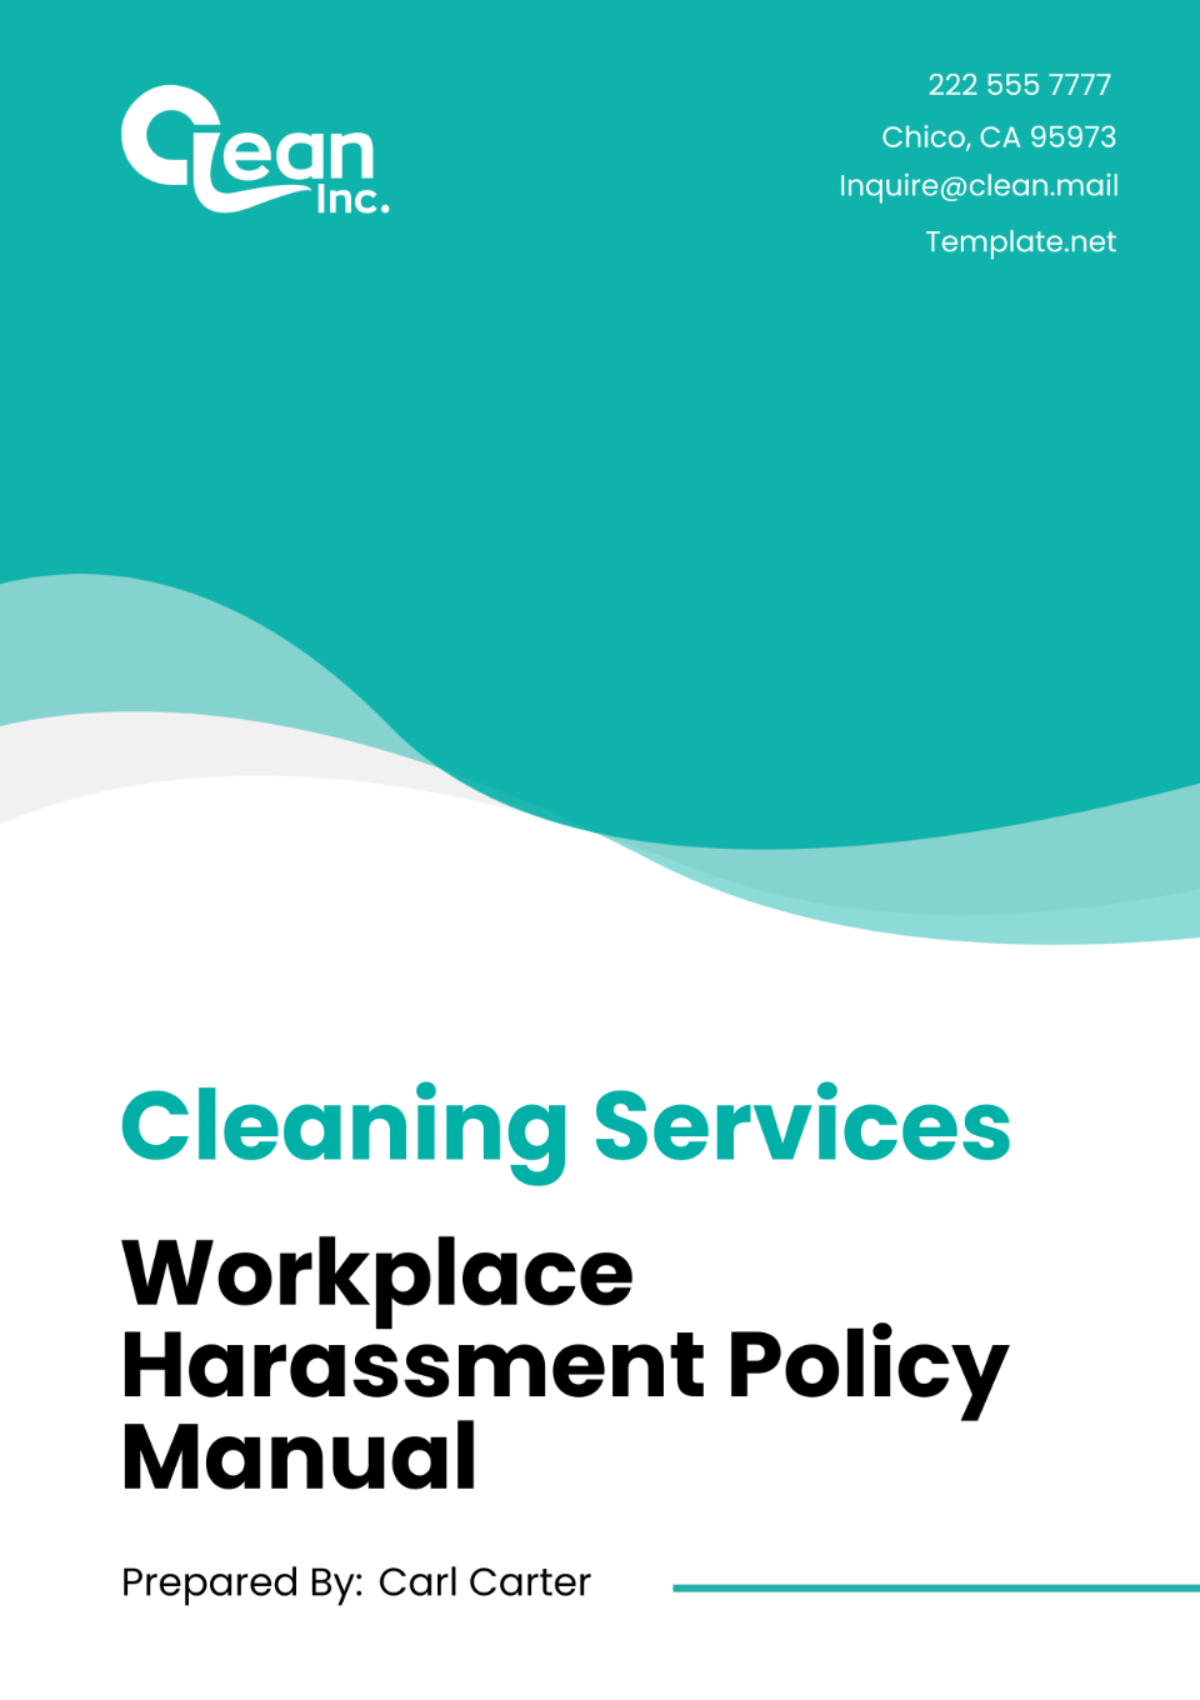 Cleaning Services Workplace Harassment Policy Manual Template